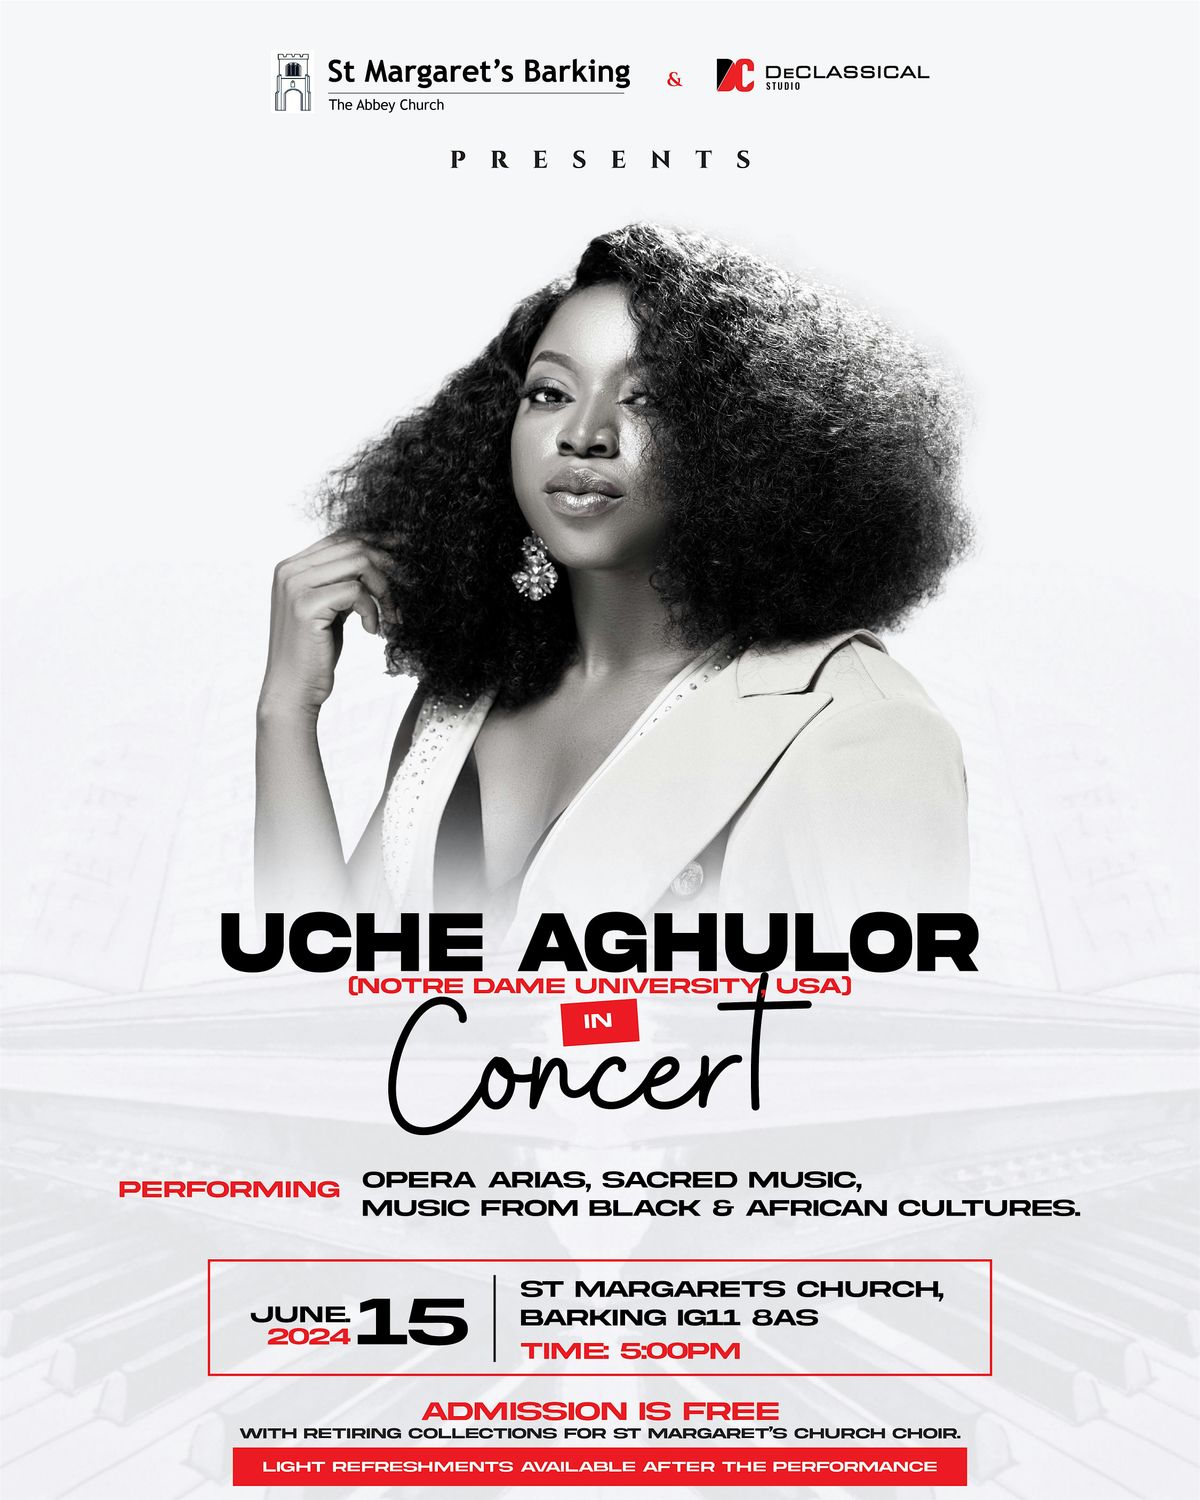 ART MUSIC CONCERT WITH UCHE AGHULOR